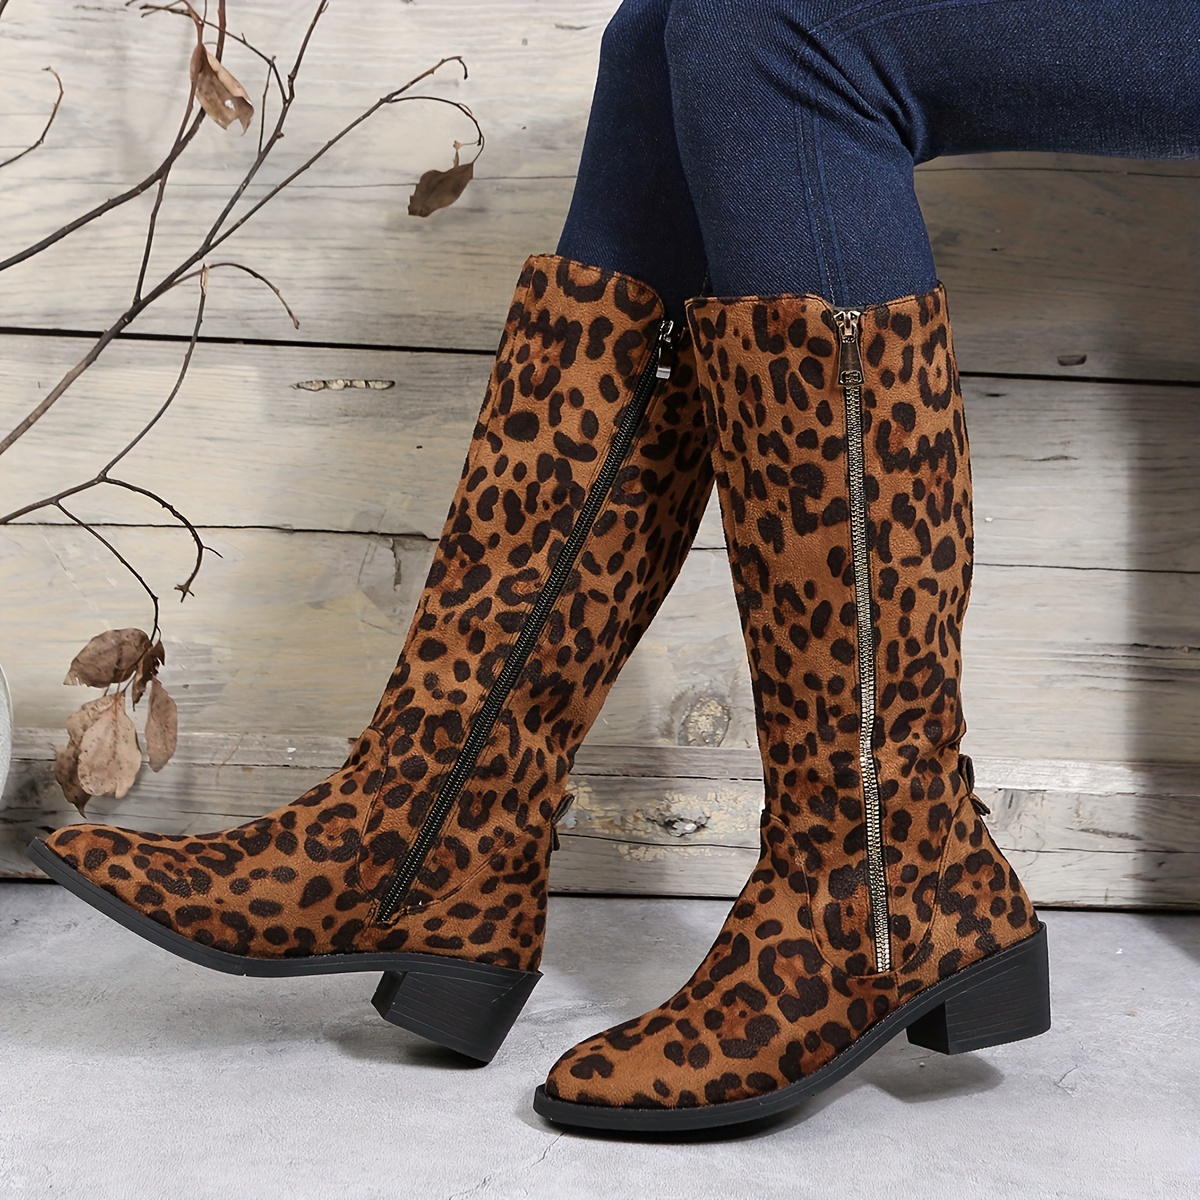 Fashion Leopard Print Ankle Boots Women Pointed Toe Flat Heel Short Boot  Winter Warm Shoes Female Chelsea Booties Botas De Mujer